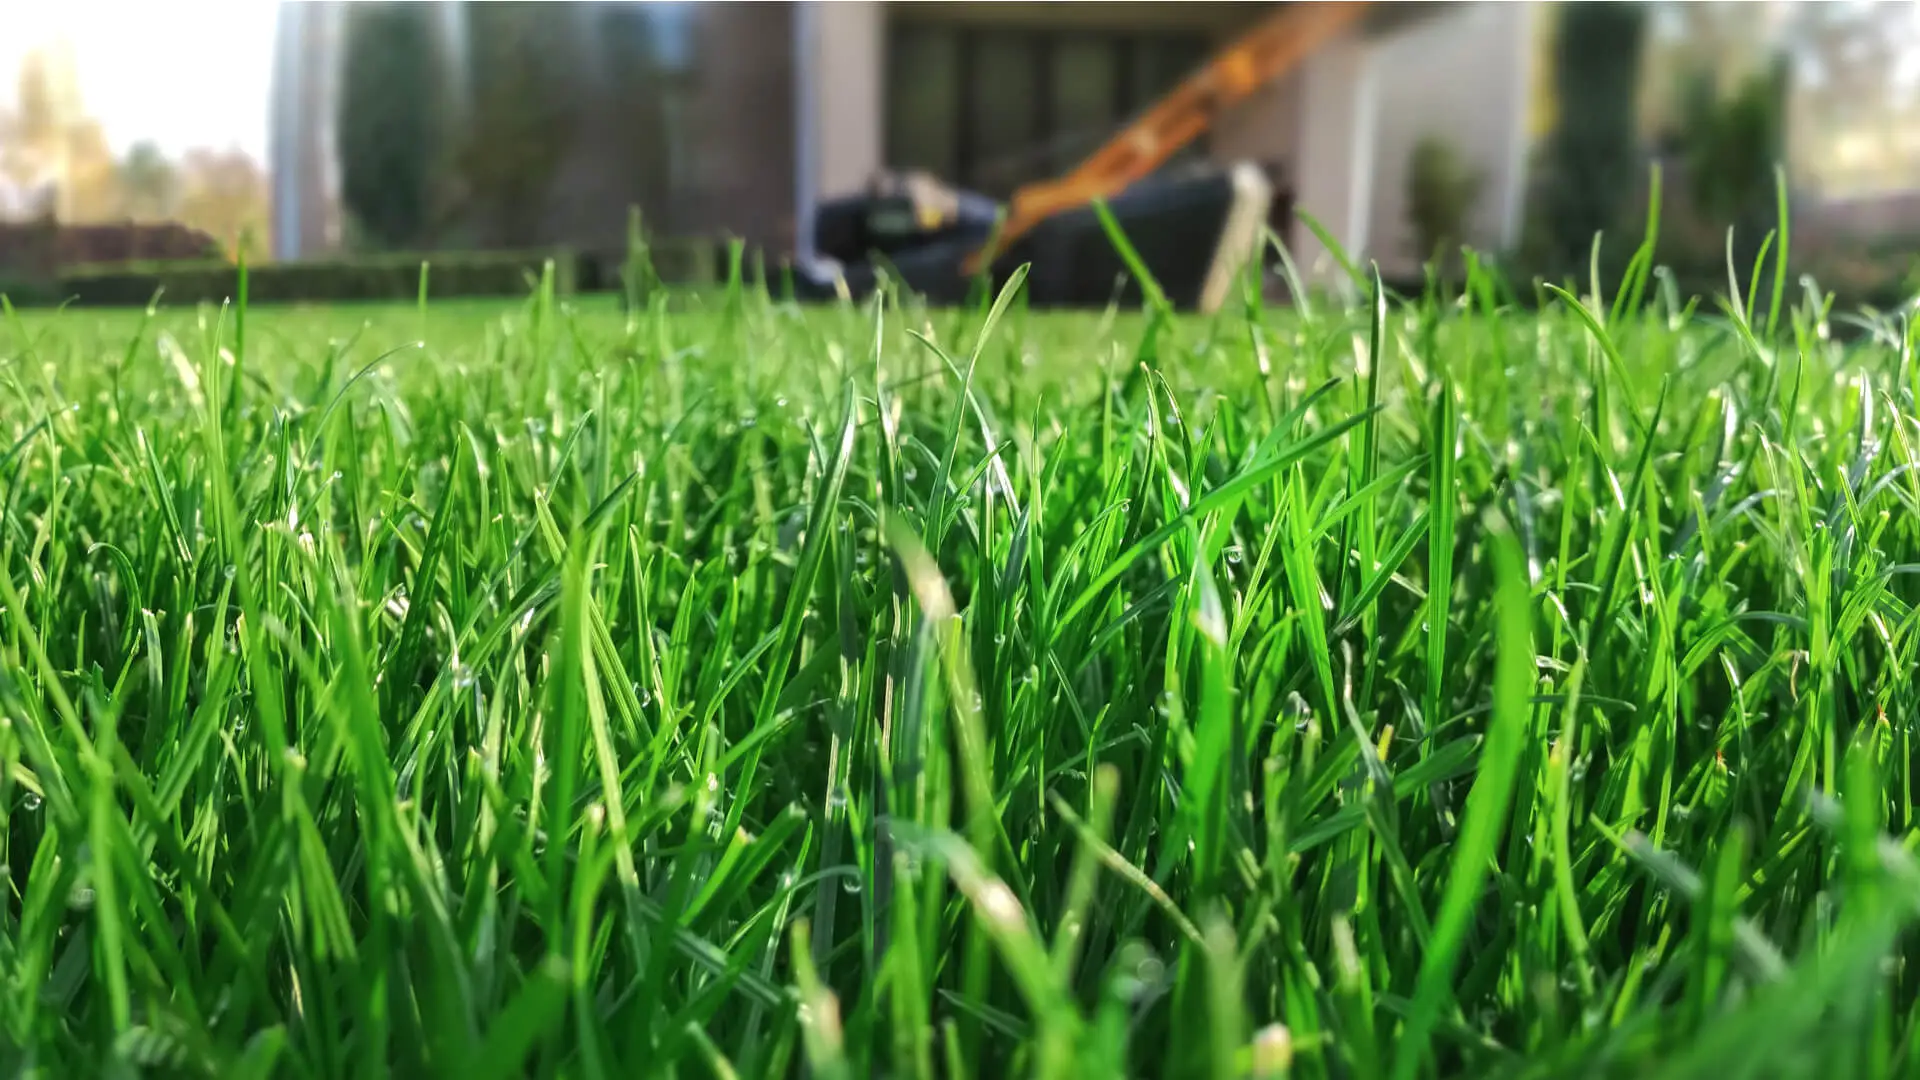 Specialists in Lawn Care Plano Advise Homeowners on Choosing a Reputable Firm